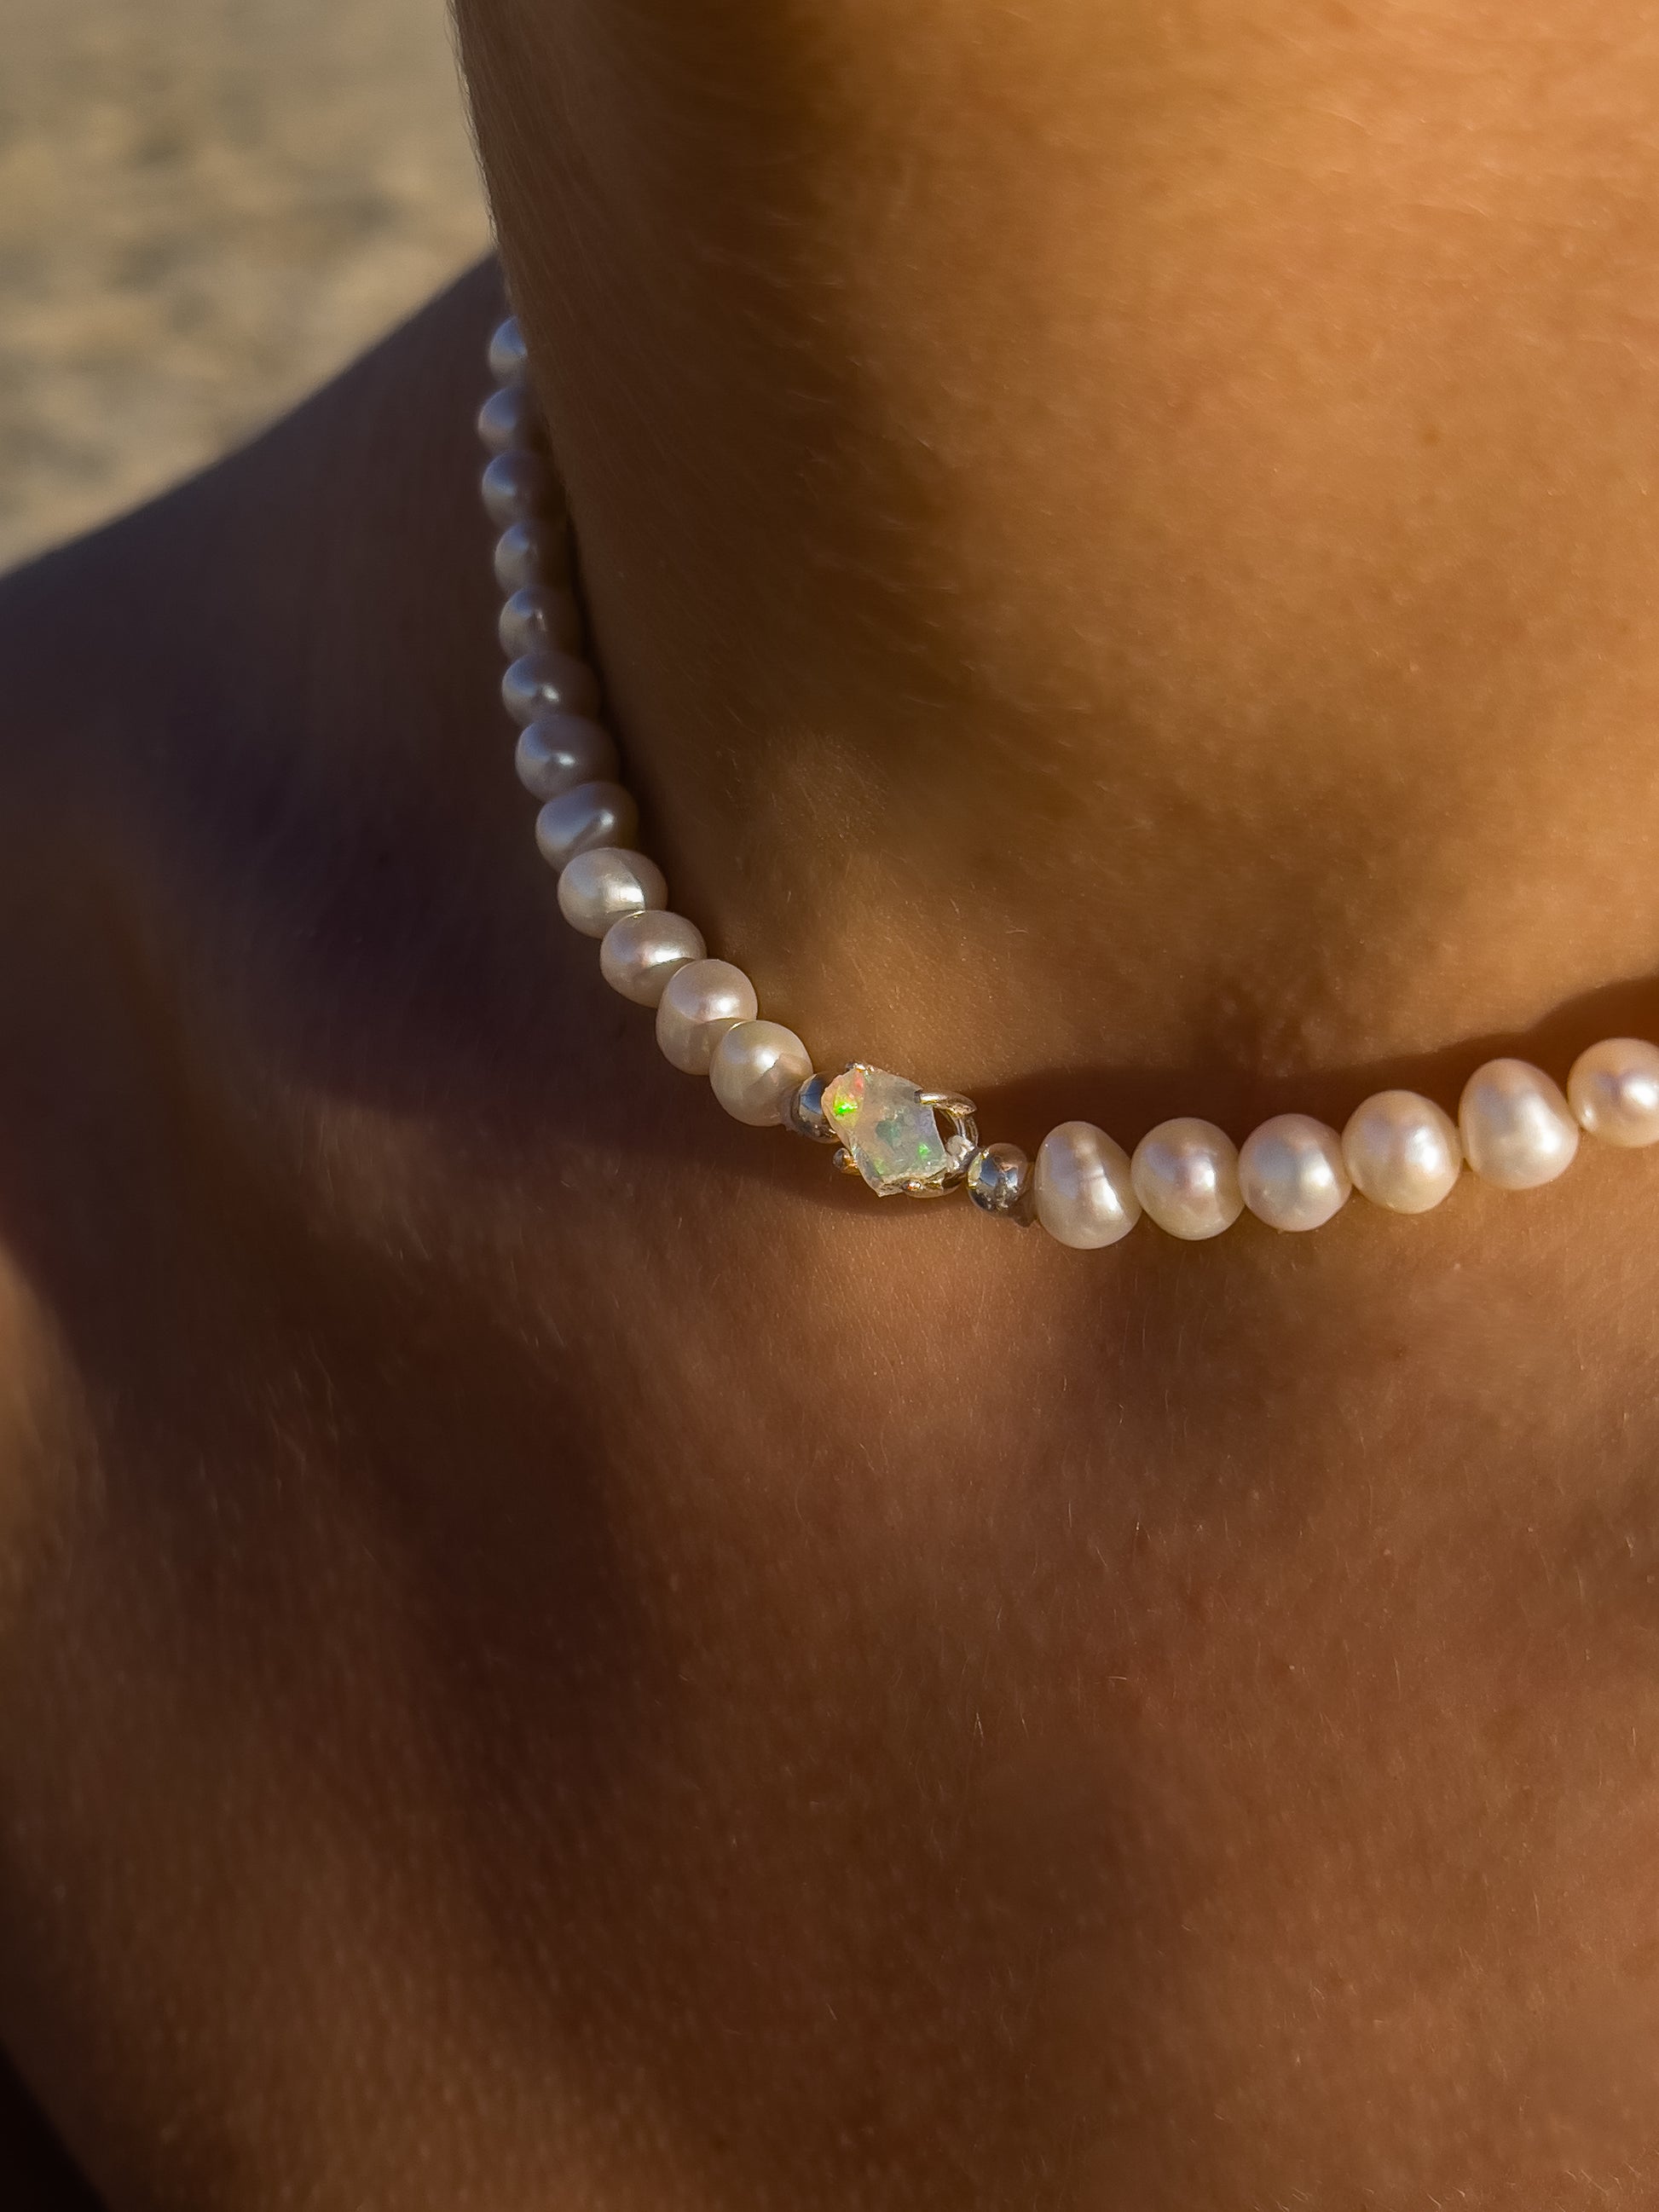 Pearl & Raw Opal Choker Necklace. Natural AA luxe pearls in a natural white are highlighted by the bright iridescent sparkle of Raw Australian Opal placed centrally on the clavicle, held in a sterling silver setting.  Personally and strung and knotted with 100% silk thread & handcrafted in Sterling Silver.   This necklace is a true statement piece.  Please note that this style is made to order, and due to the natural and raw elements, each piece is completely unique.